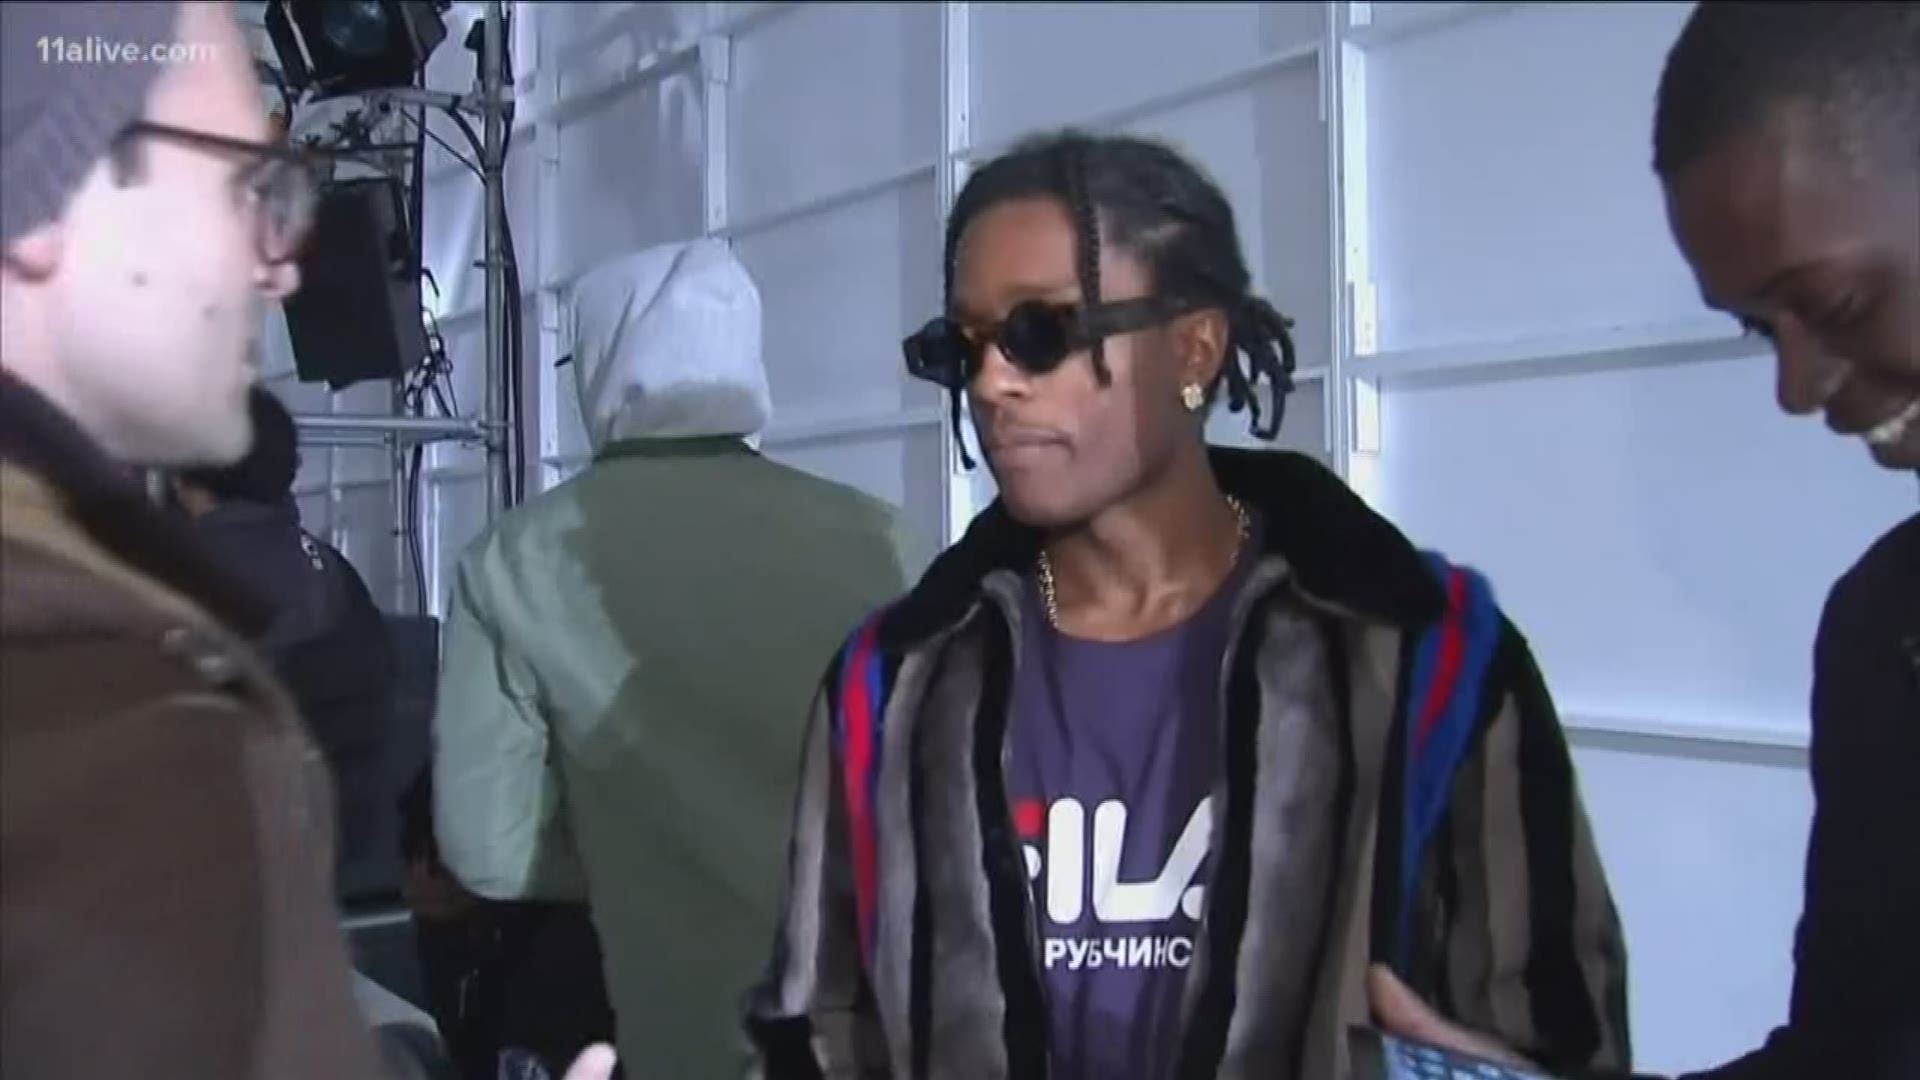 A$AP Rocky is detained in Sweden after a fight in Stockholm.